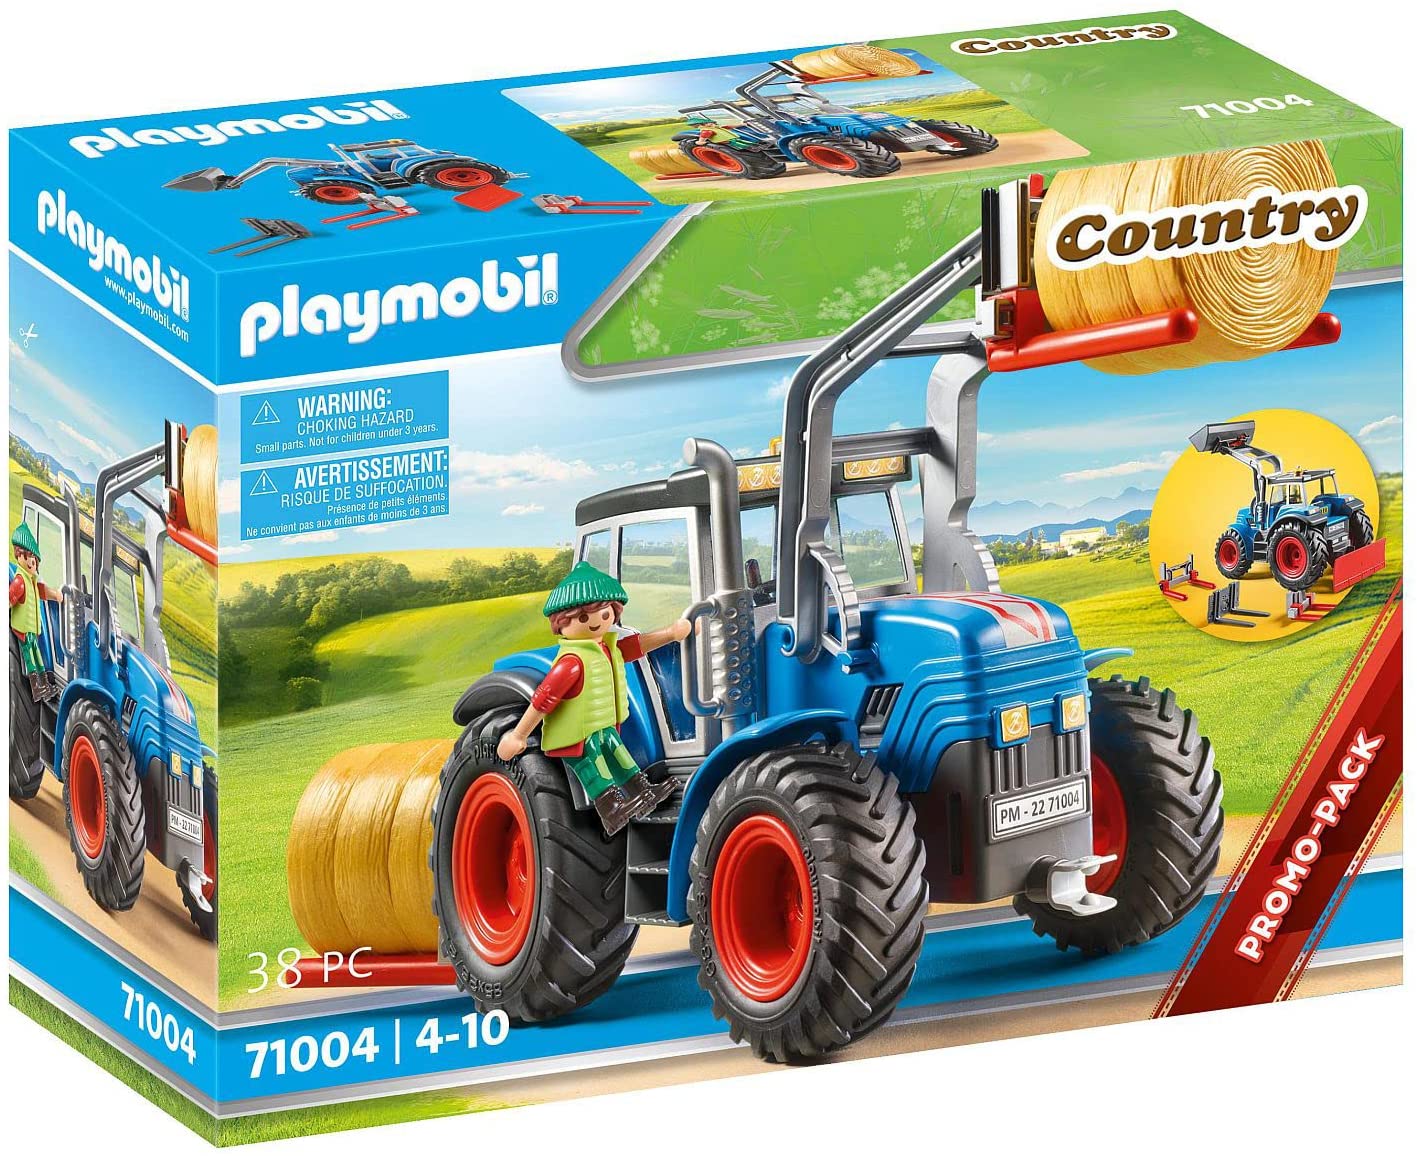 PLAYMOBIL Country 71004 Large Tractor with Accessories and Tow Bar Toy for Children from 4 Years